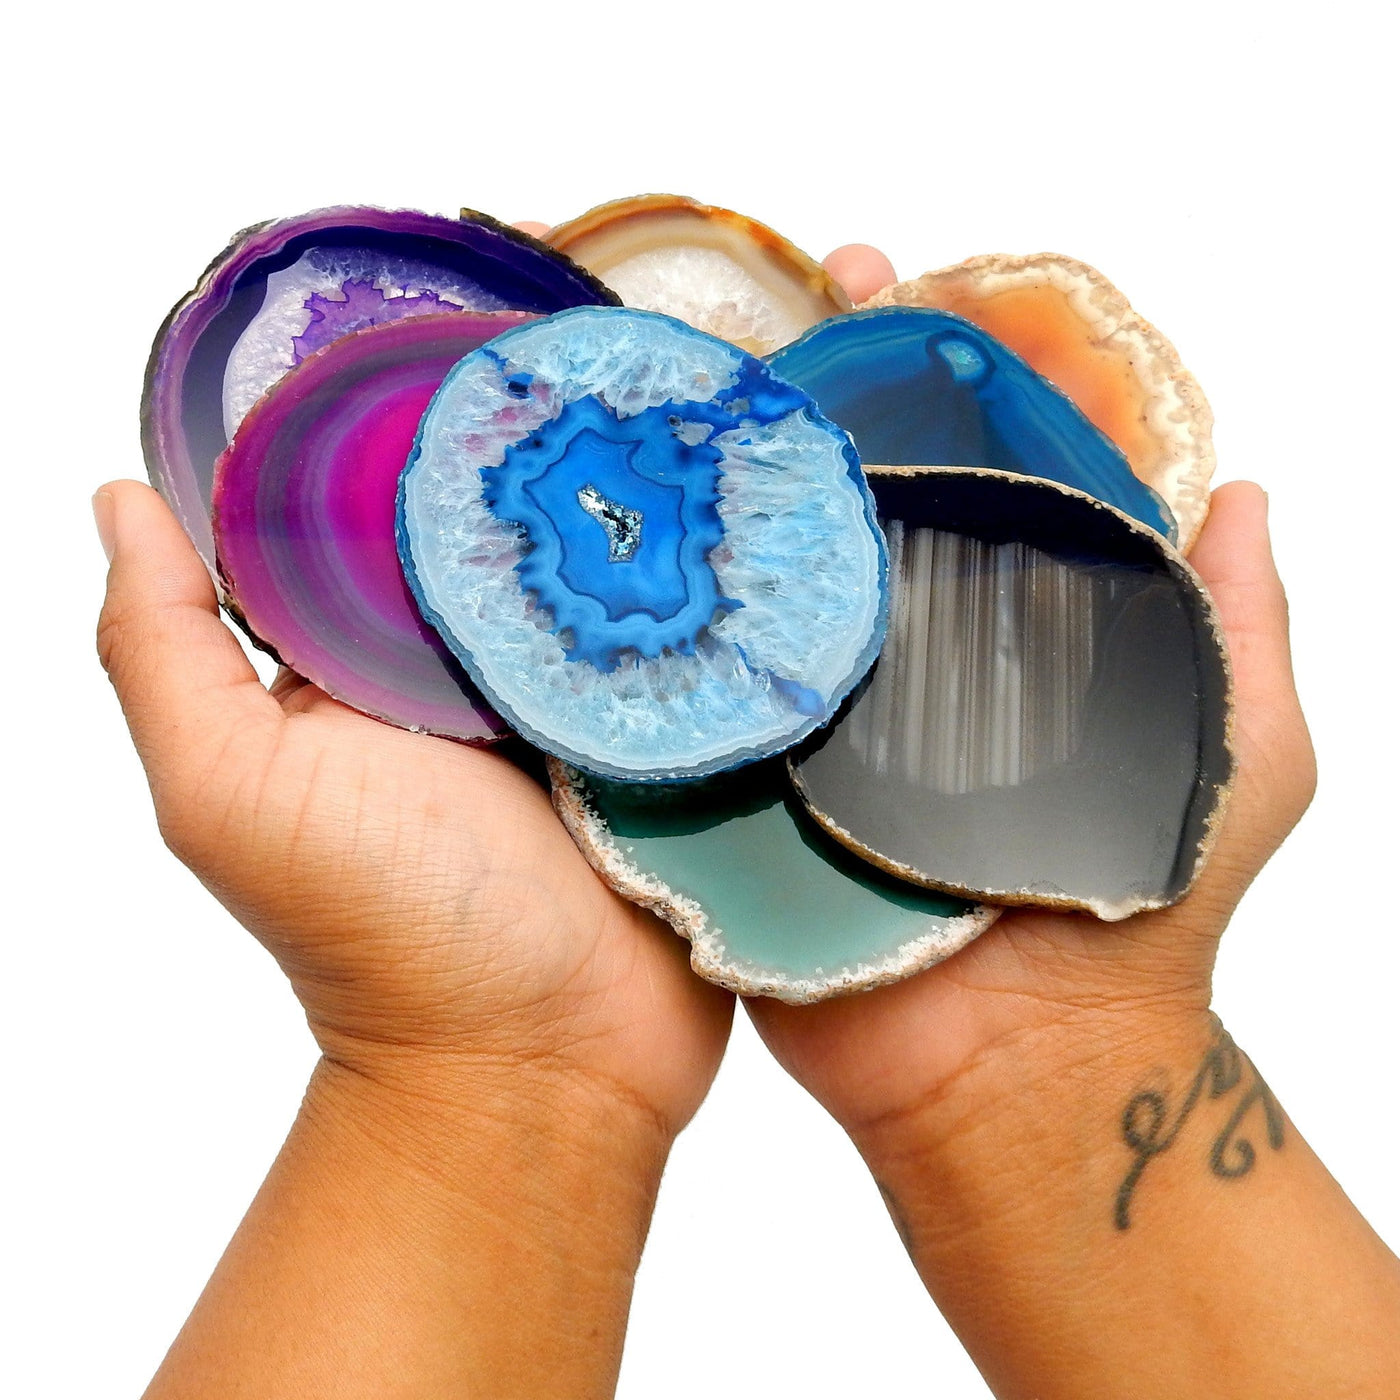 This picture is showing all the variety of colors we have available for our size 2 agate slices. They are also being displayed in hands.  